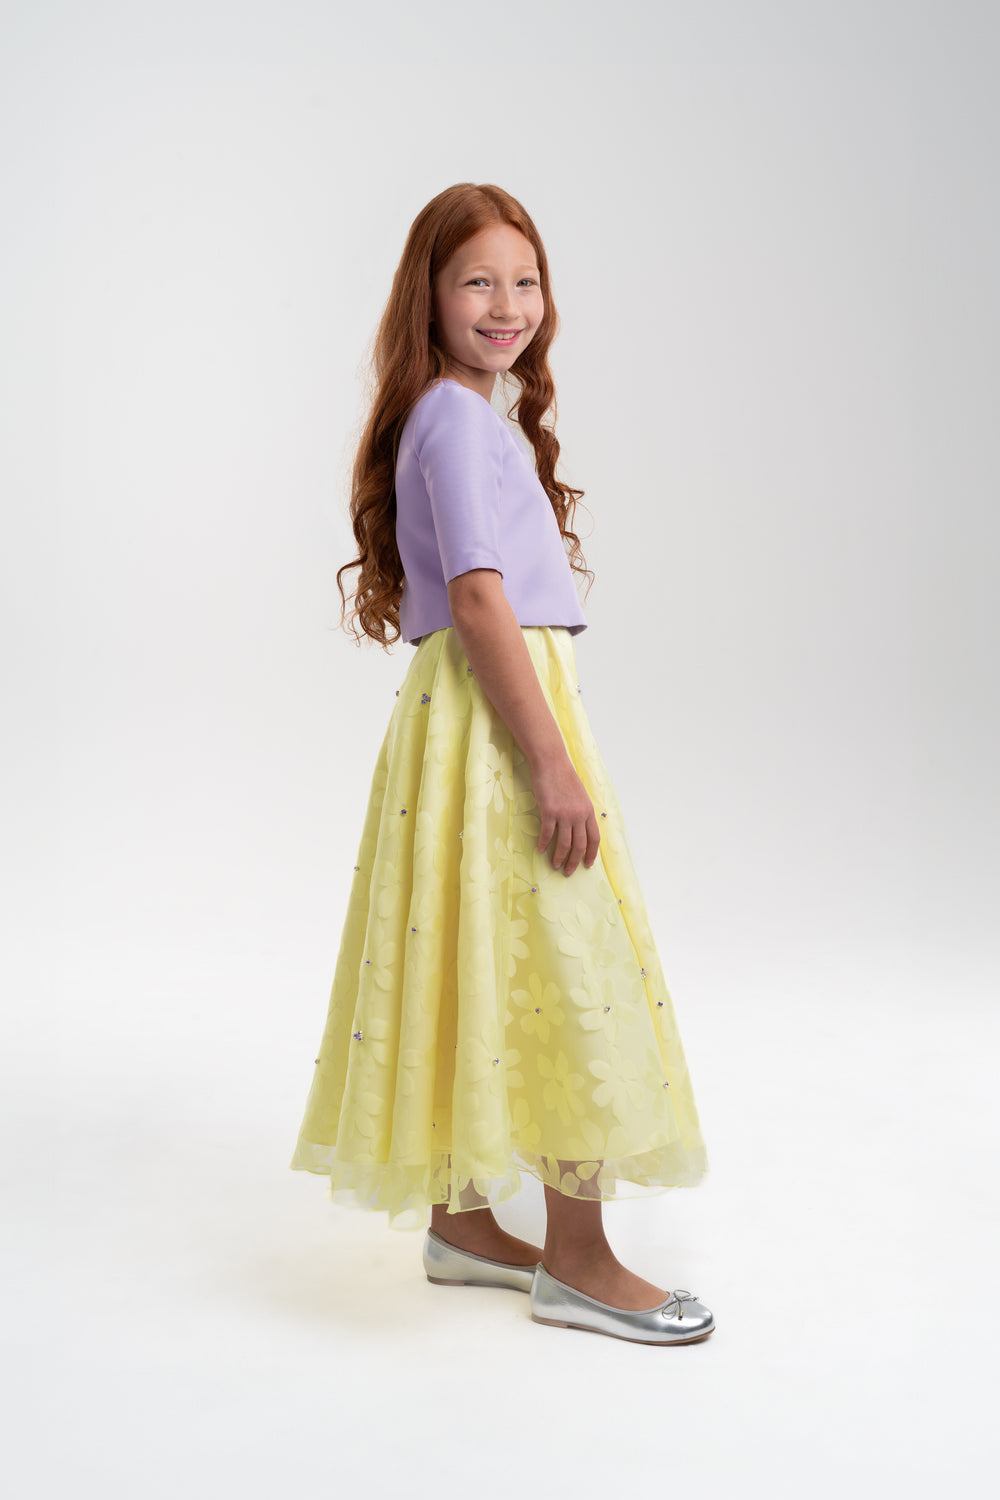 Lavender Top With Floral Yellow Skirt